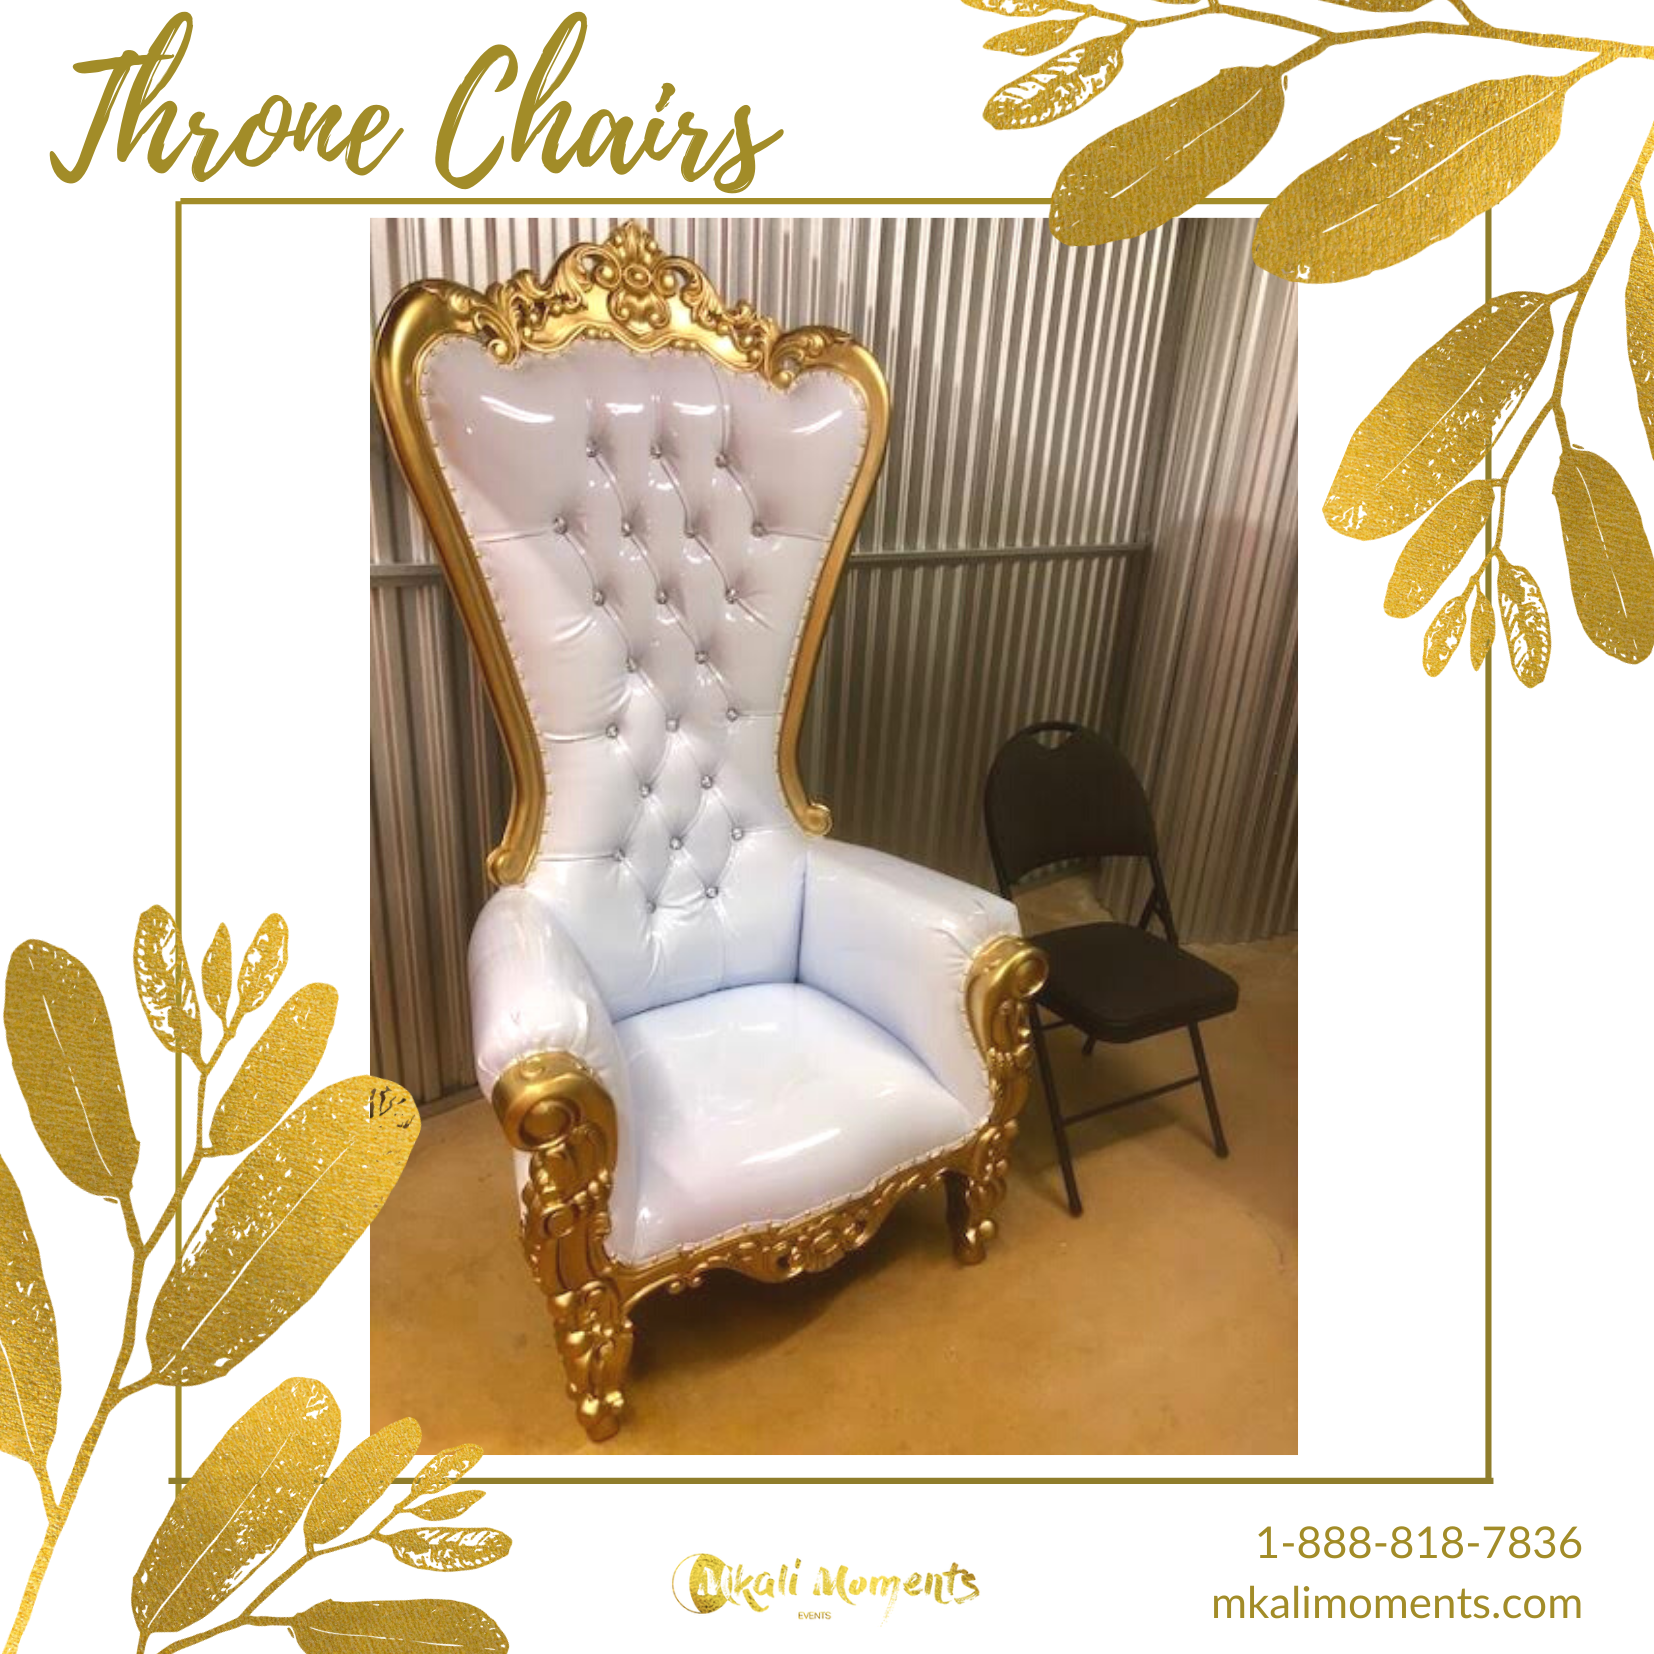 King and Queen White Leather, Gold Trim Throne Chair - Ribald Events